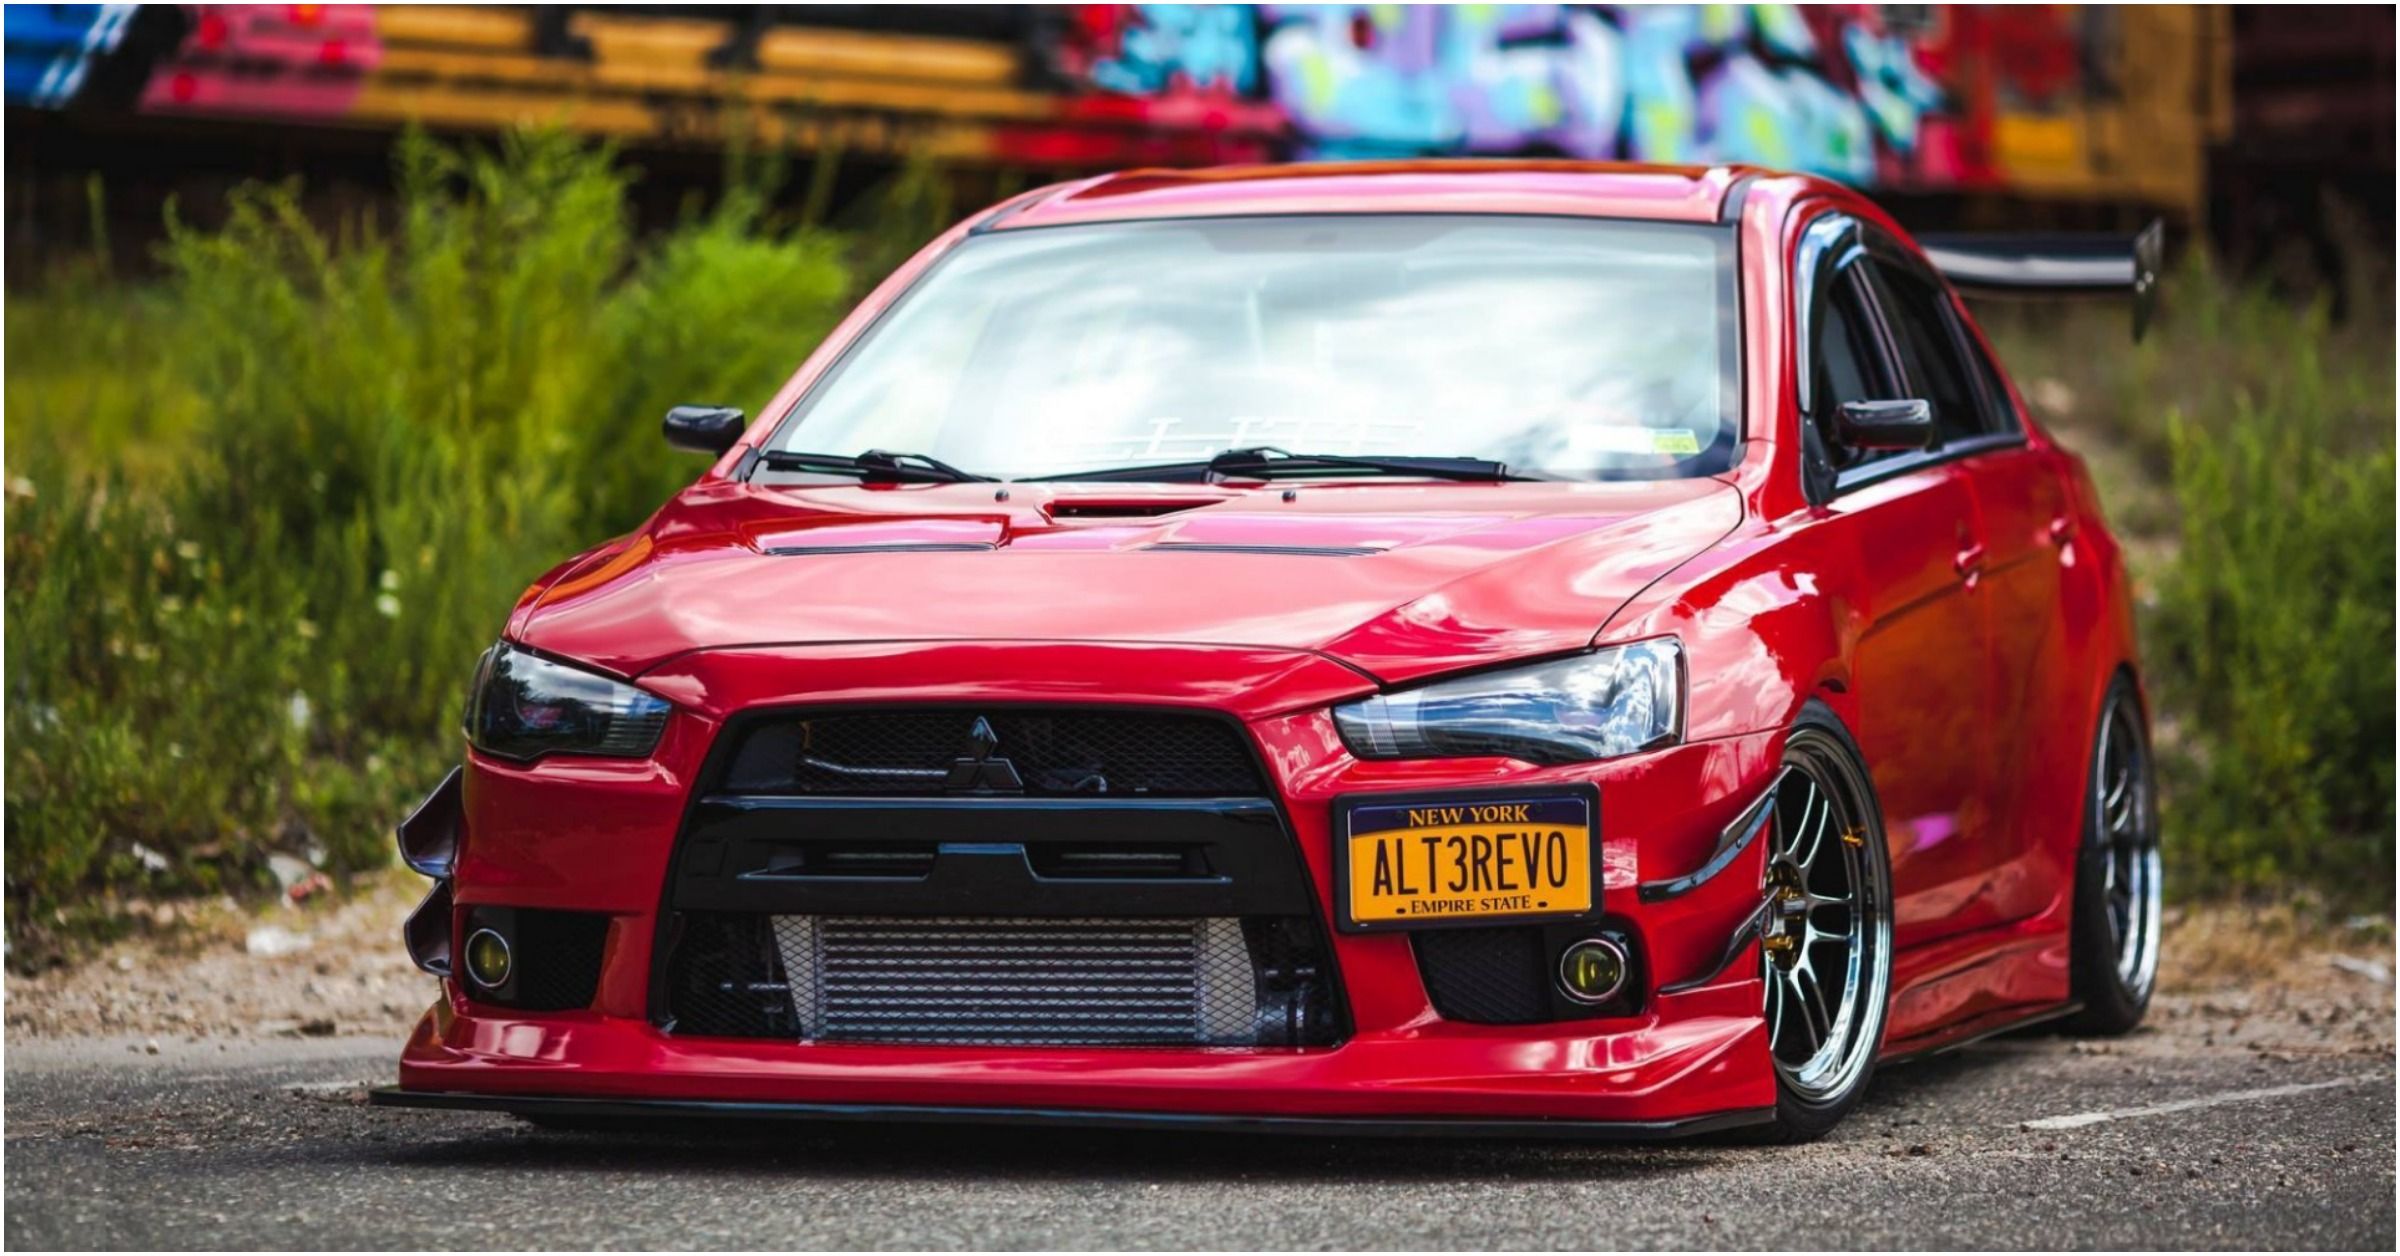 15 Things You Forgot About The Mitsubishi Lancer Evo | HotCars